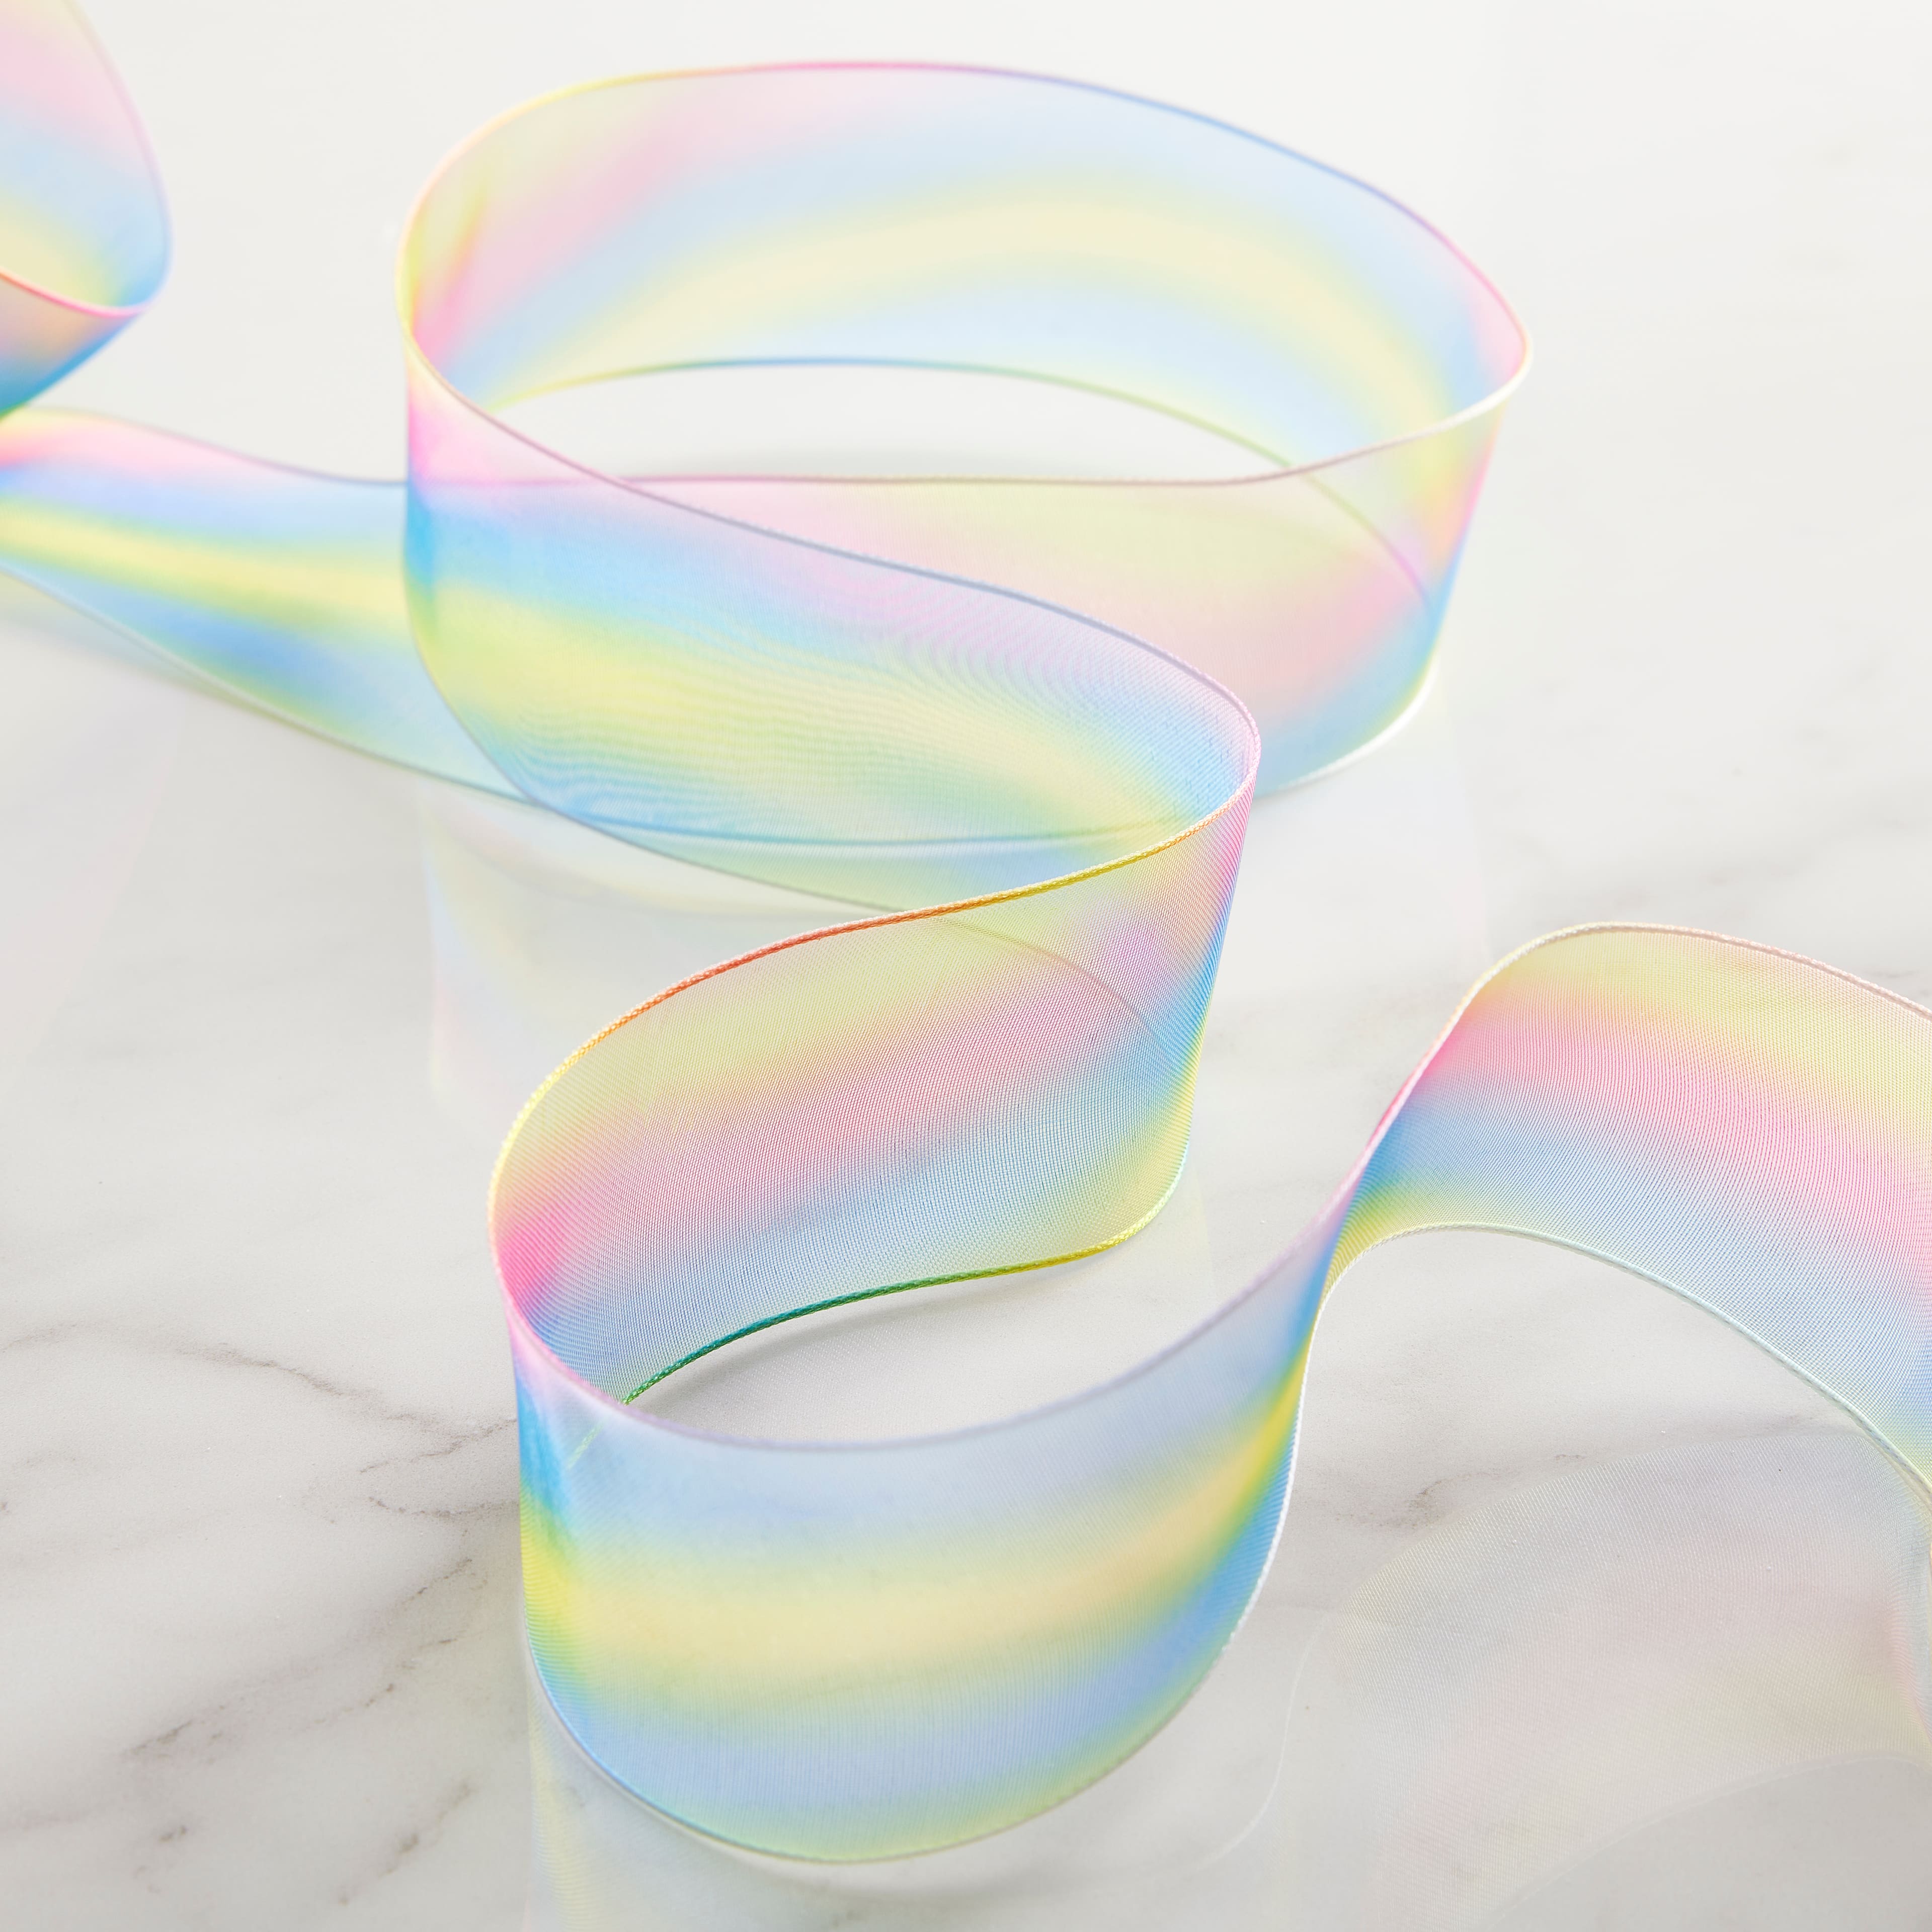 1.5 Sheer Wired Rainbow Striped Ribbon by Celebrate It™ 360